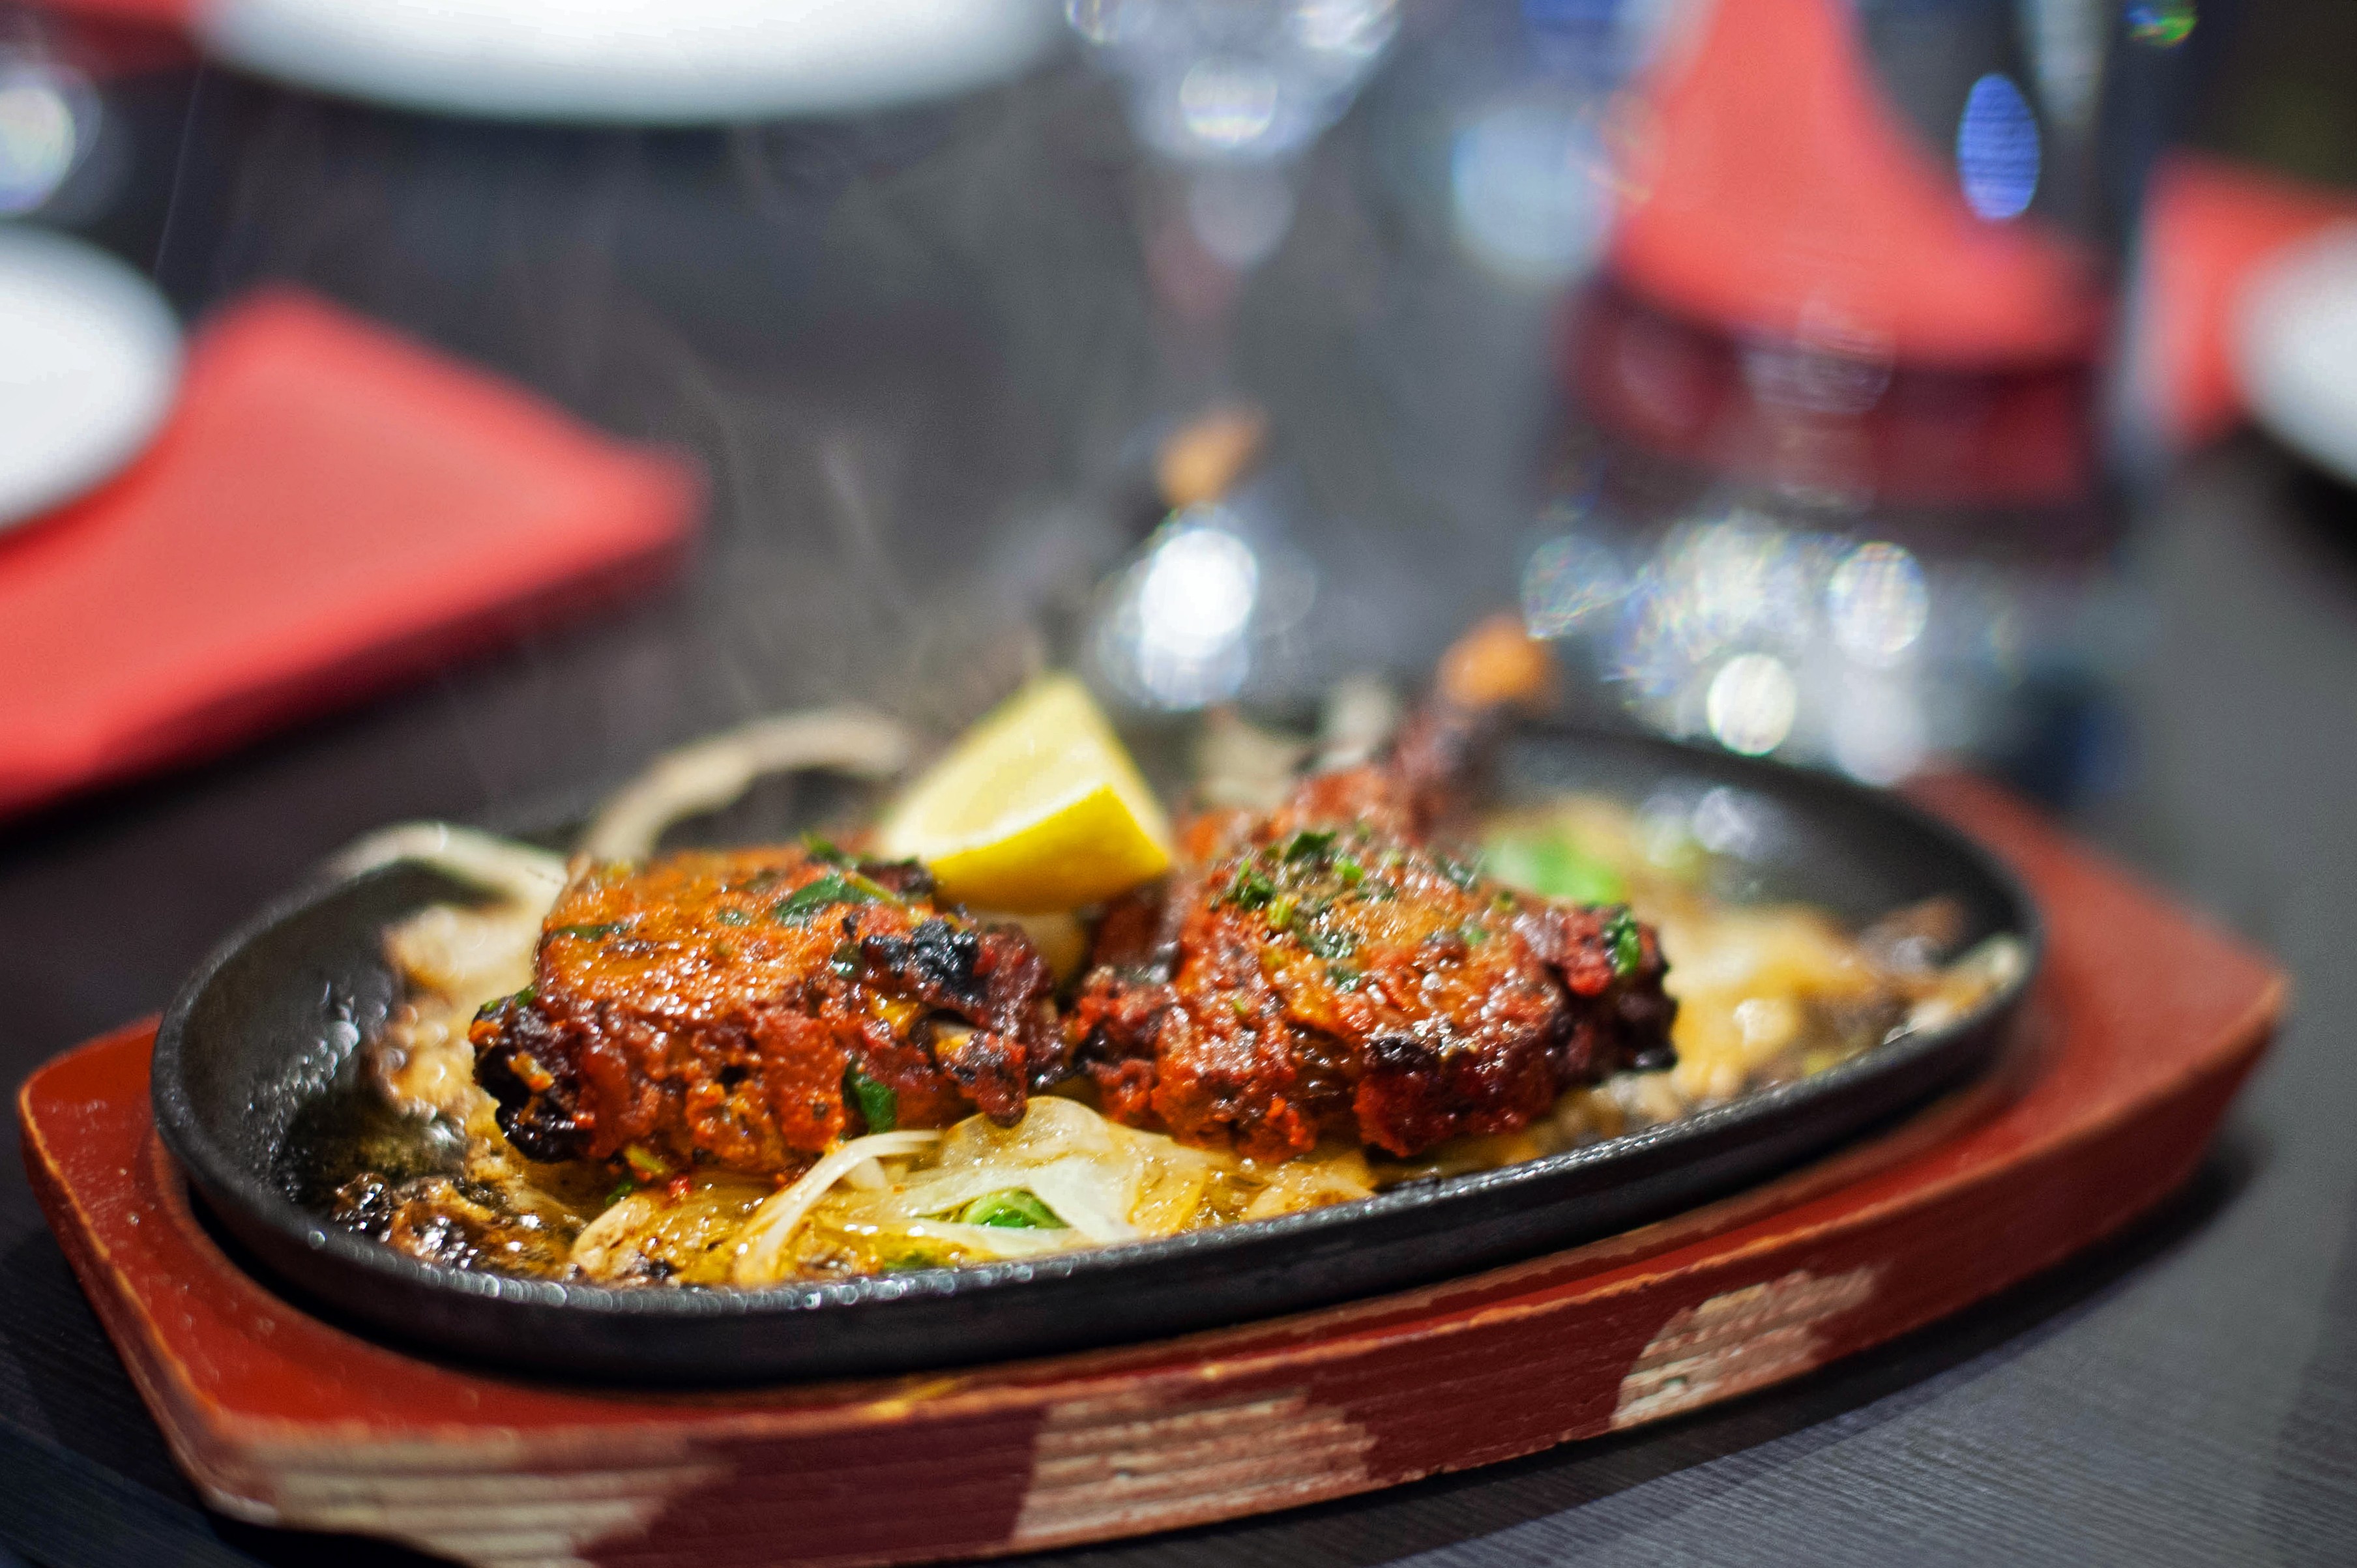 Delhi to Canberra delivers majestic Indian flavours in Melba